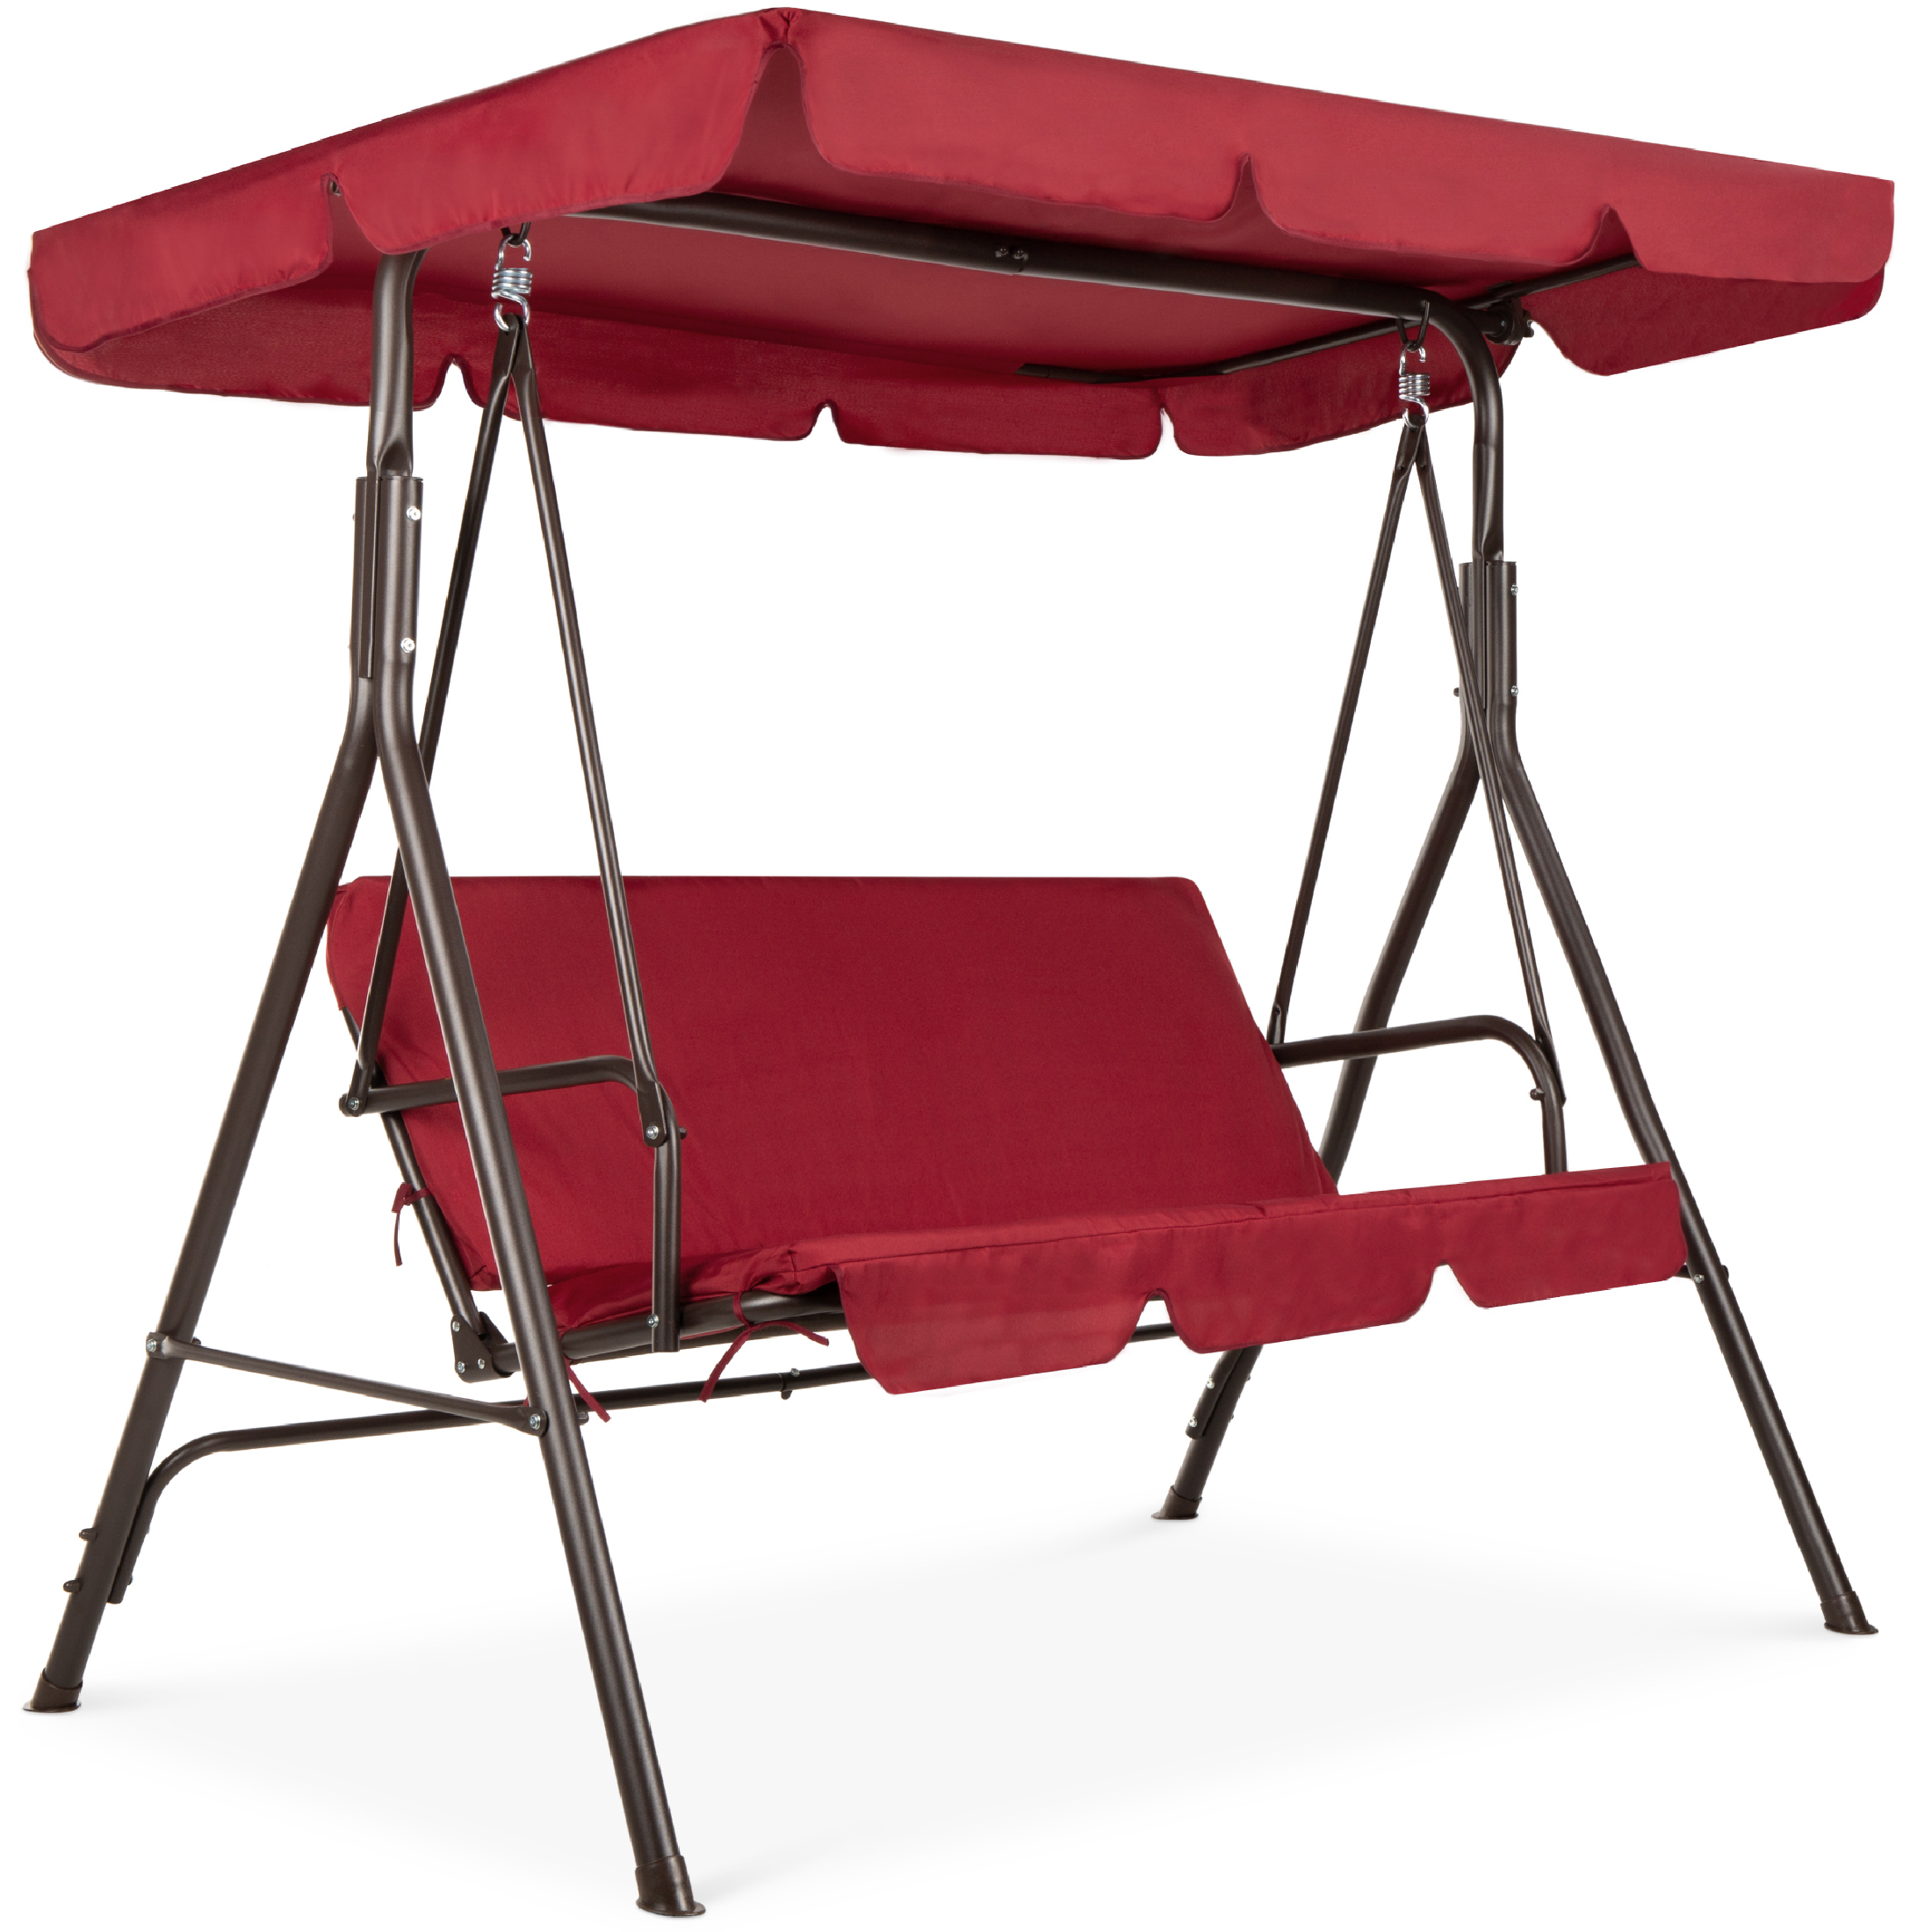 Best Choice Products 2-Person Outdoor Convertible Canopy Swing Glider Lounge Chair w/ Removable Cushions - Burgundy - image 1 of 7